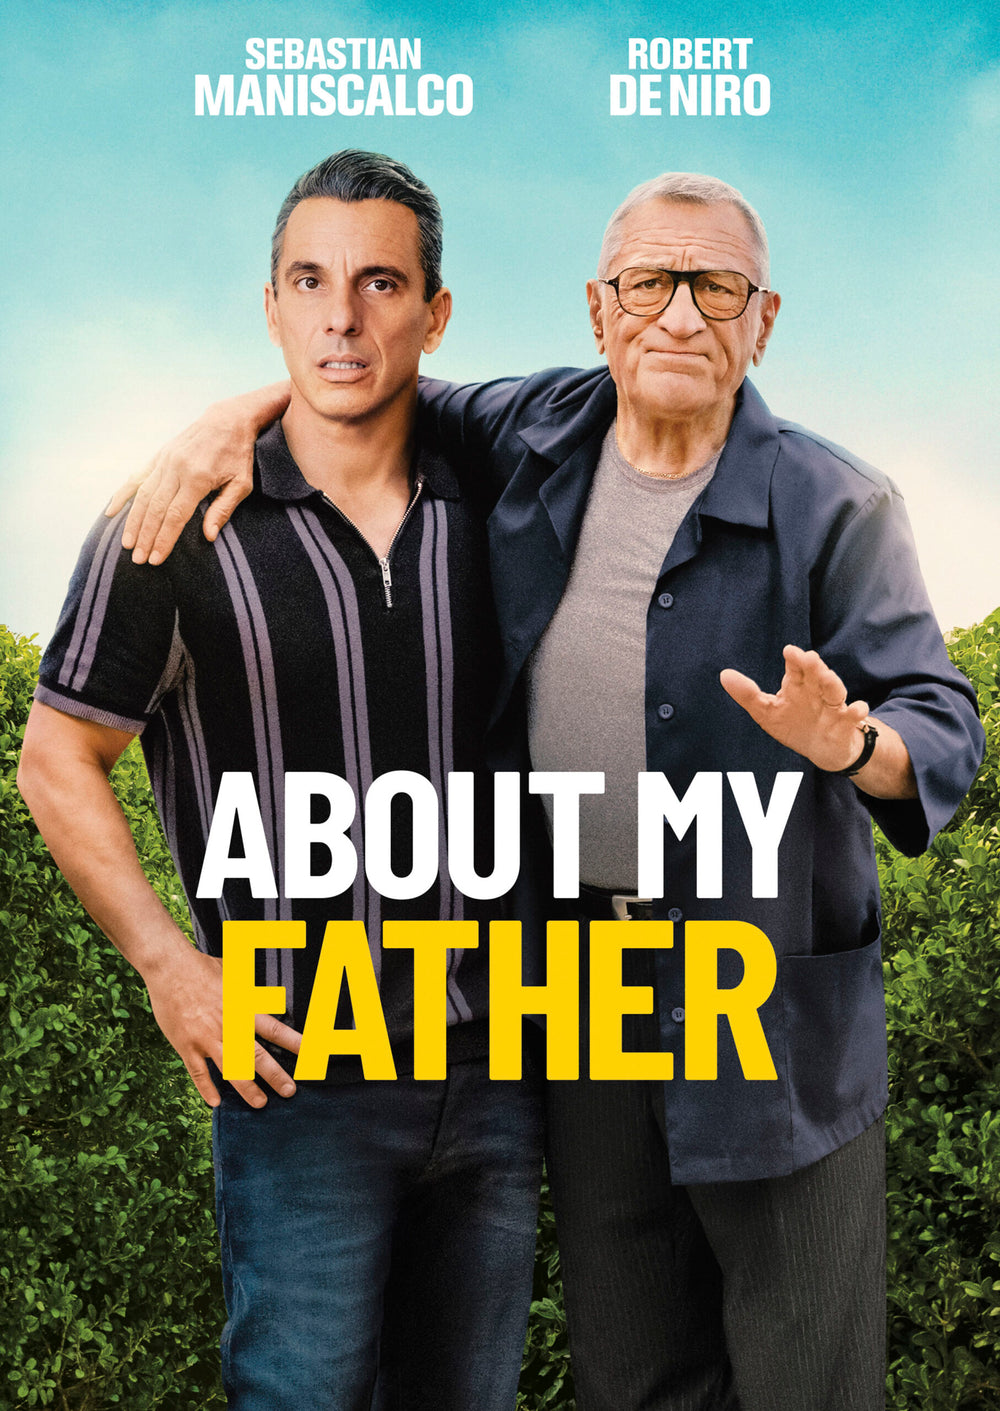 About My father HD Vudu or 4K iTunes via movieredeem.com